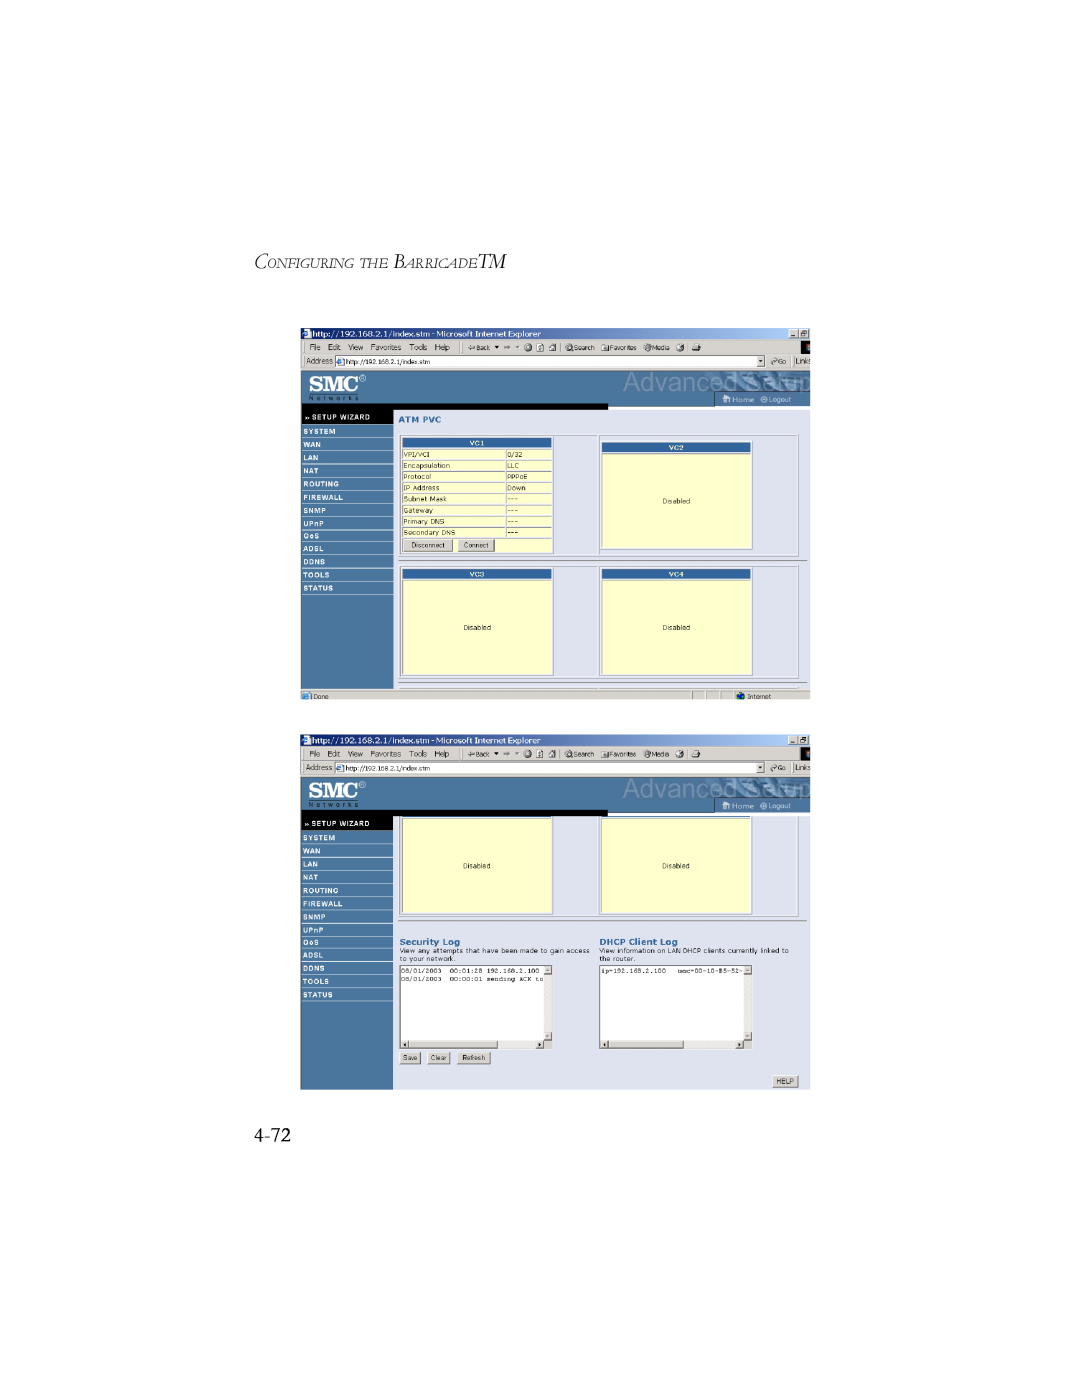 SMC Networks SMC7904BRB2 manual 4-72, Configuring The Barricadetm 